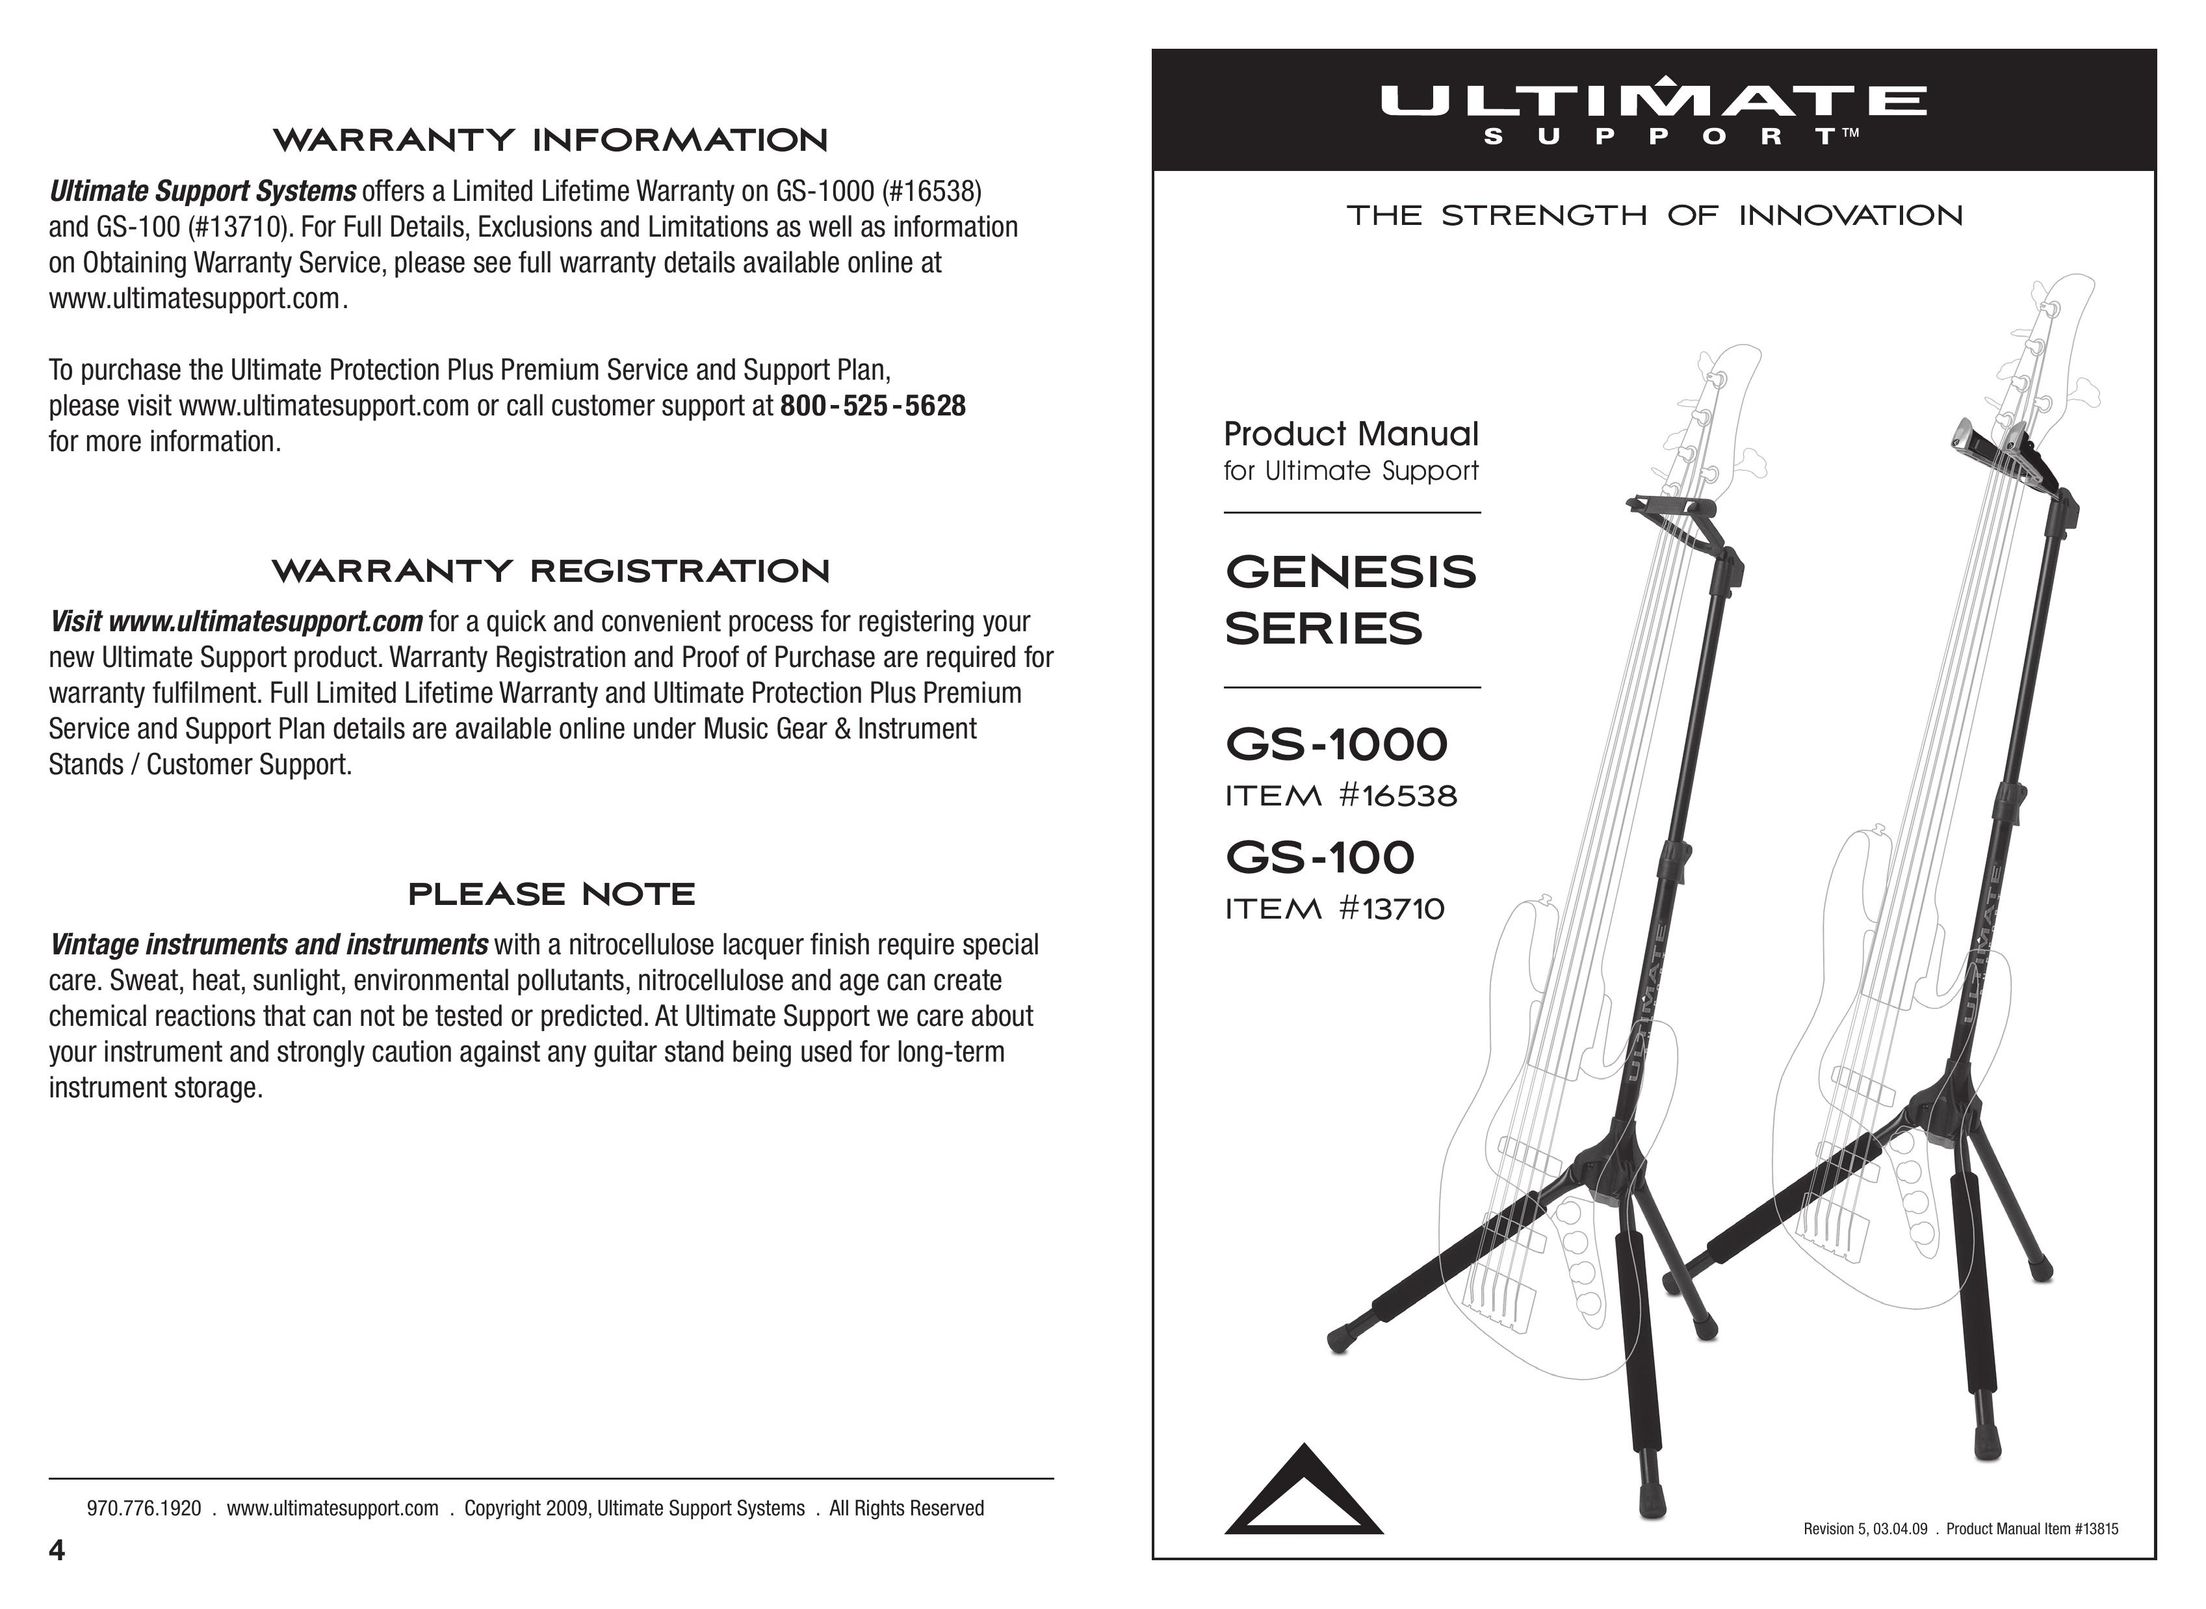 Ultimate Support Systems GS-1000 Musical Toy Instrument User Manual (Page 1)